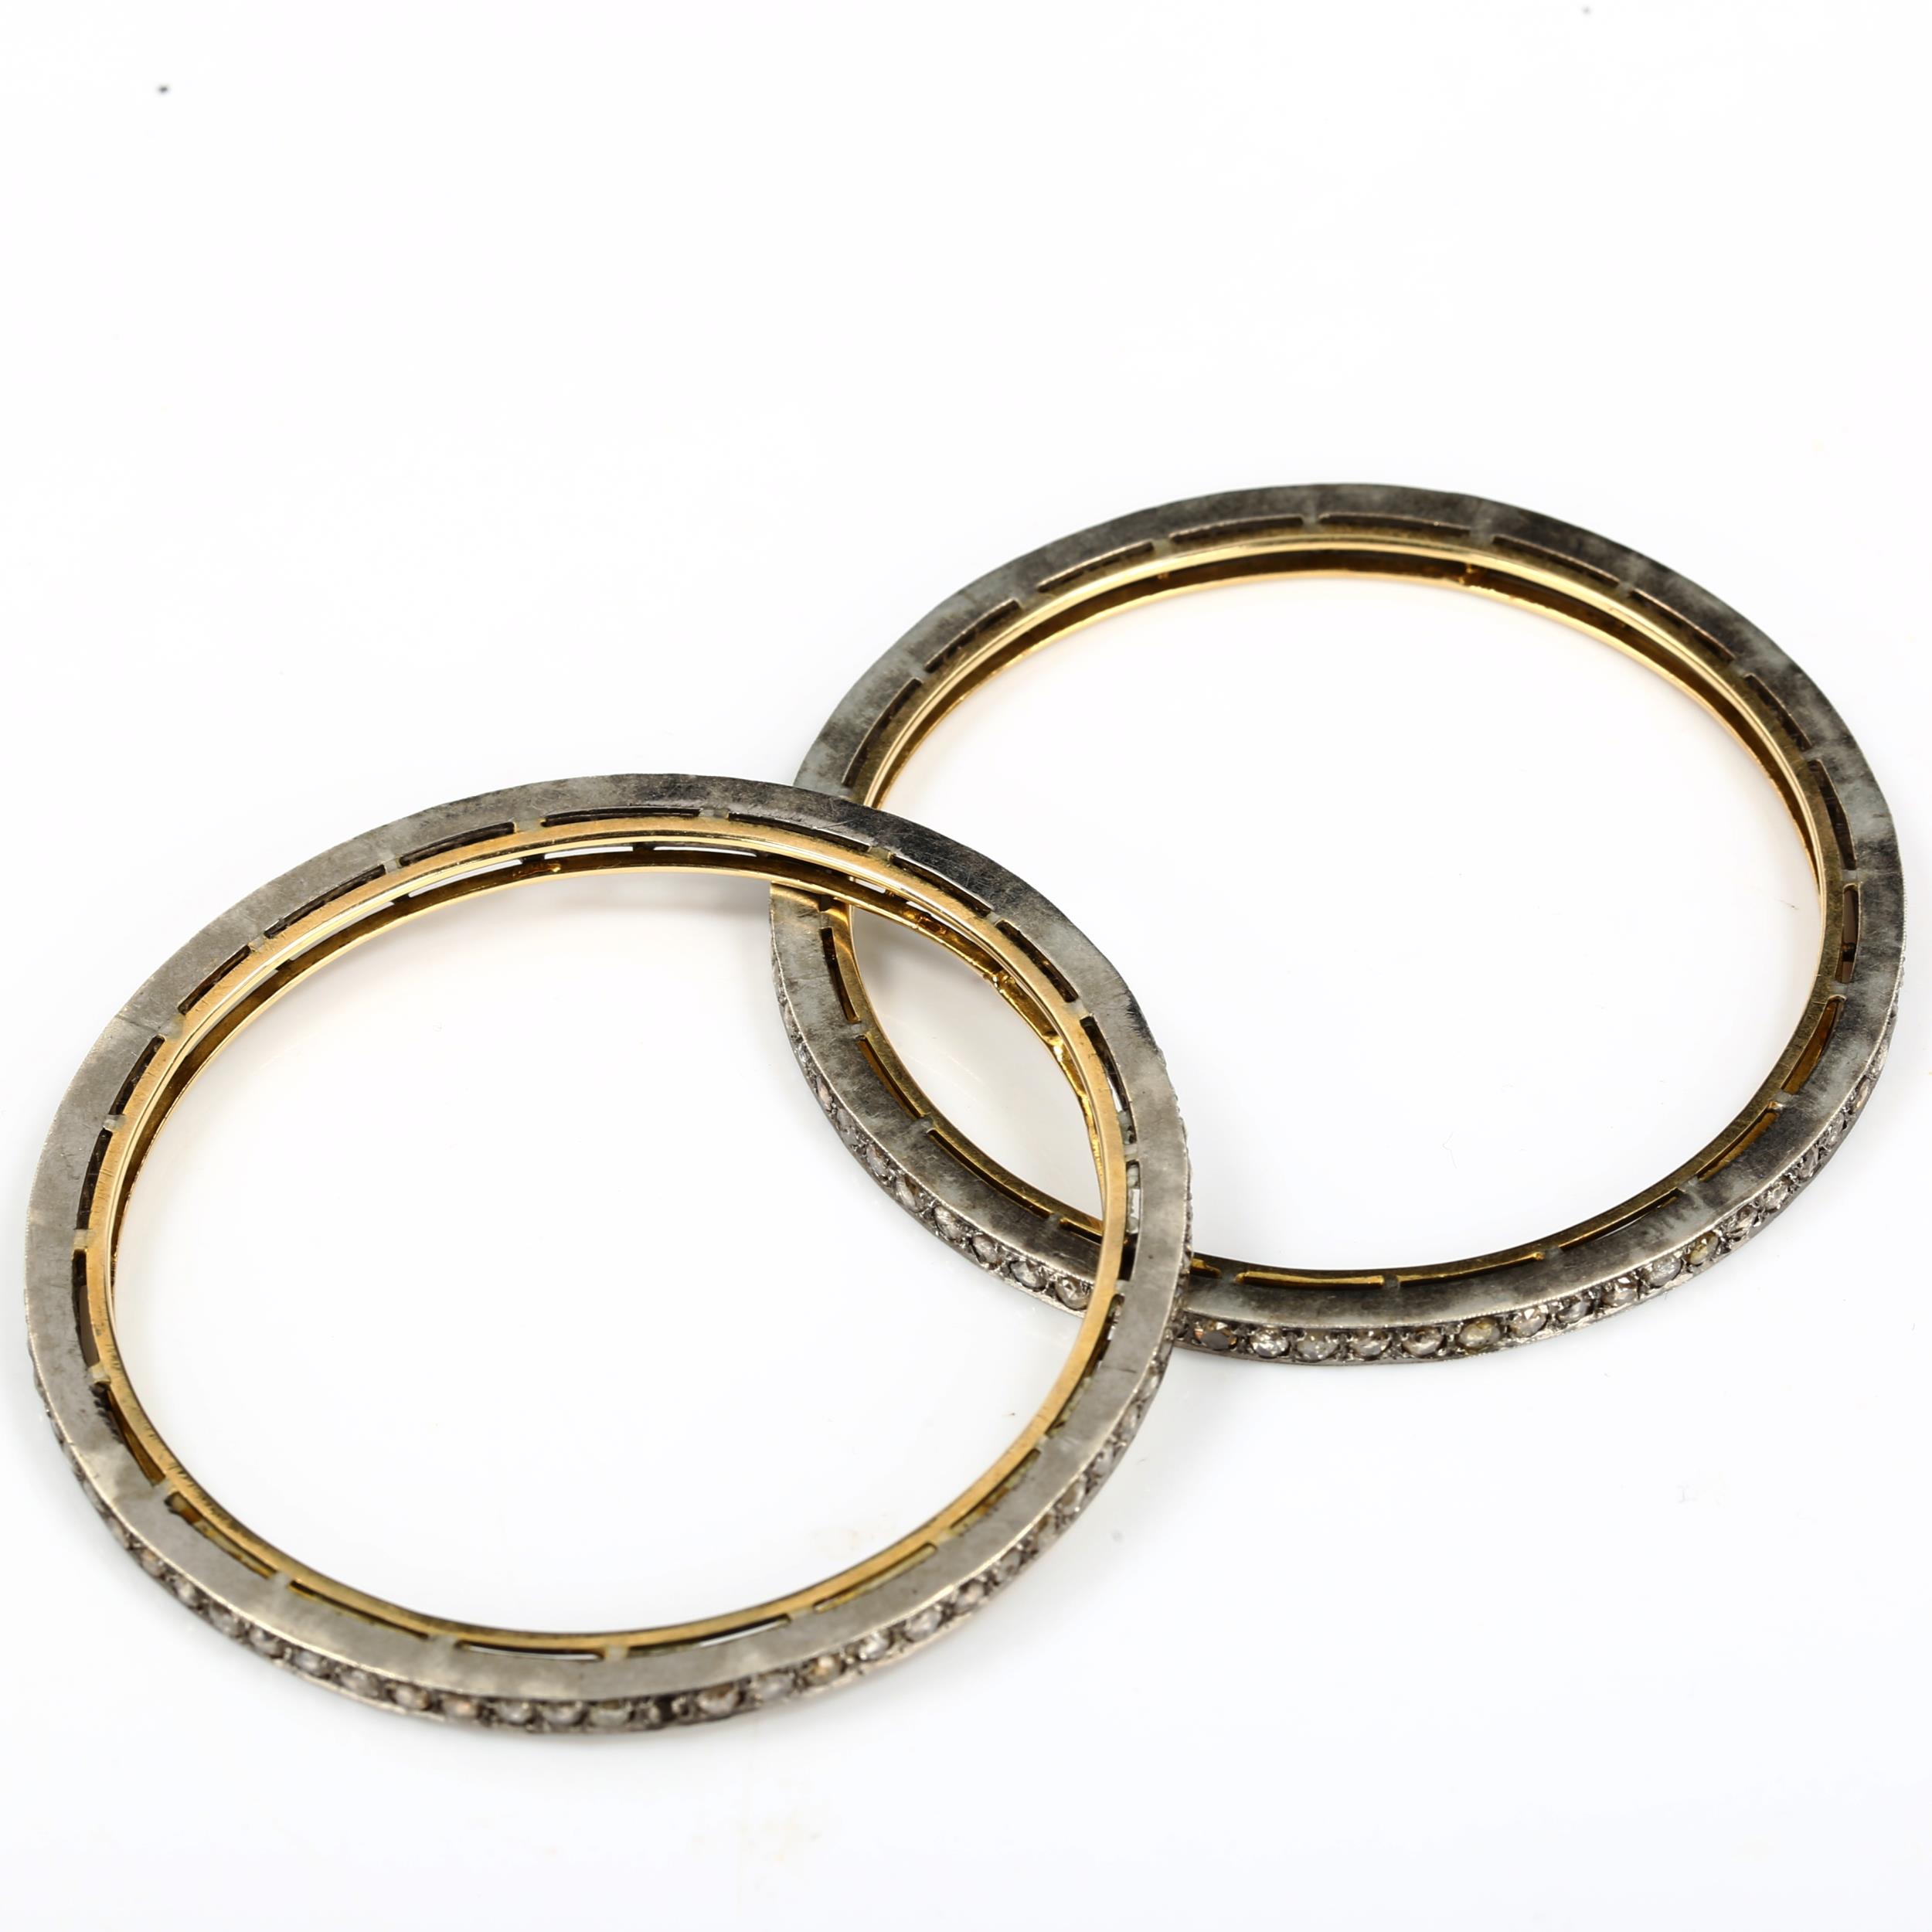 A pair of Indian silver on gold diamond slave bangles, set with rose-cut diamonds, band width 3.6mm, - Image 2 of 4